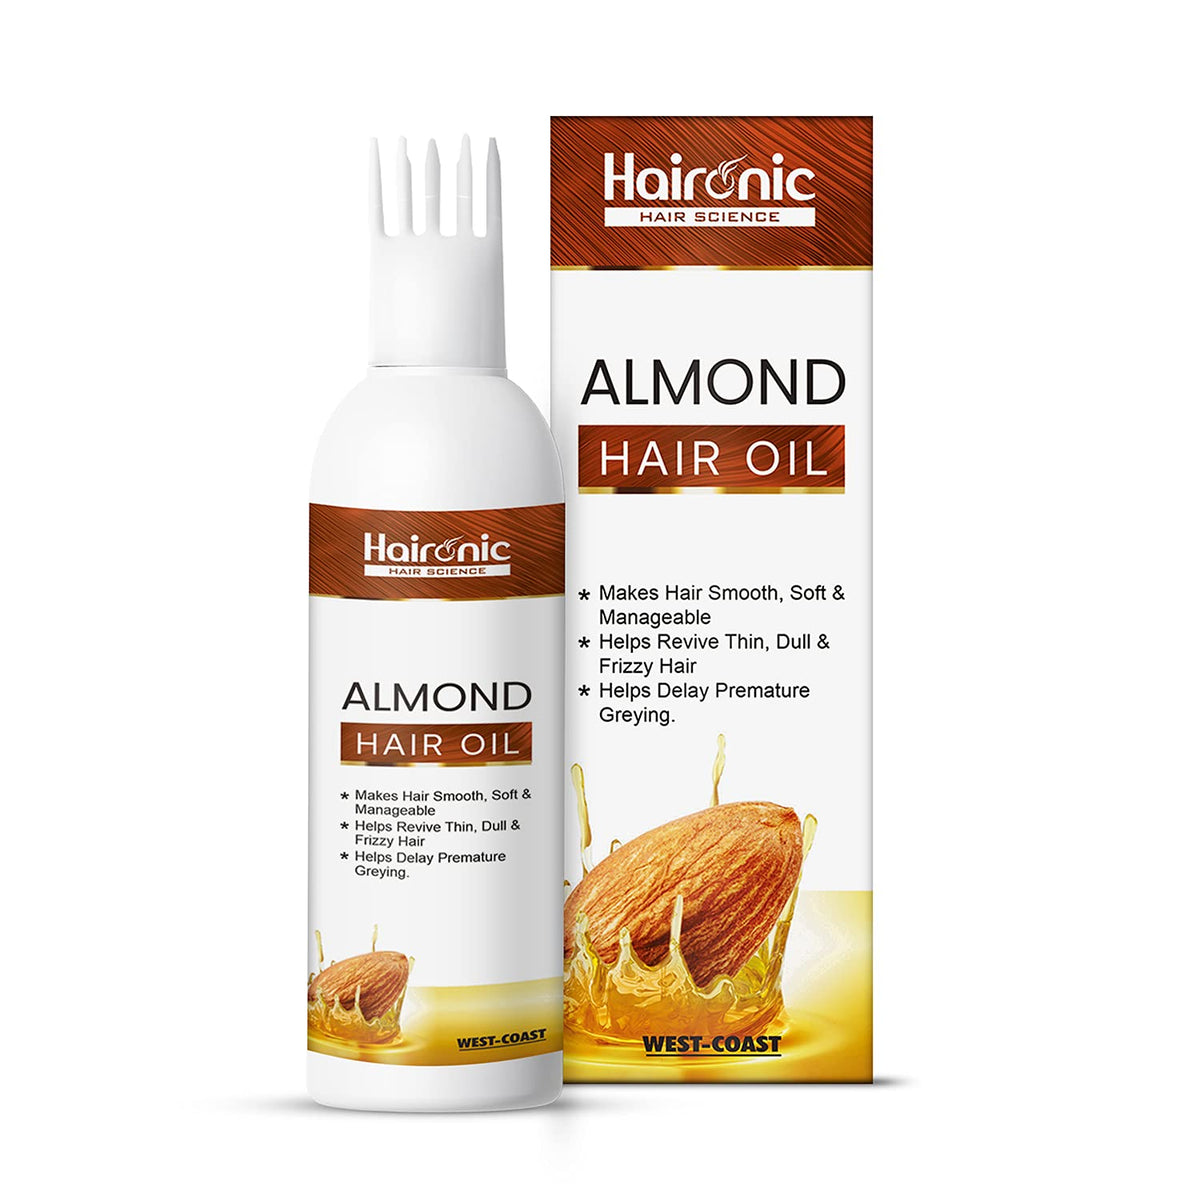 Haironic Hair Science Almond Hair Oil | Makes Hair Smooth, Soft & Manageable, Helps Revive Thin, Dull & Frizzy Hair | Suitable For All Hair Types - 100ml (Pack of 10)